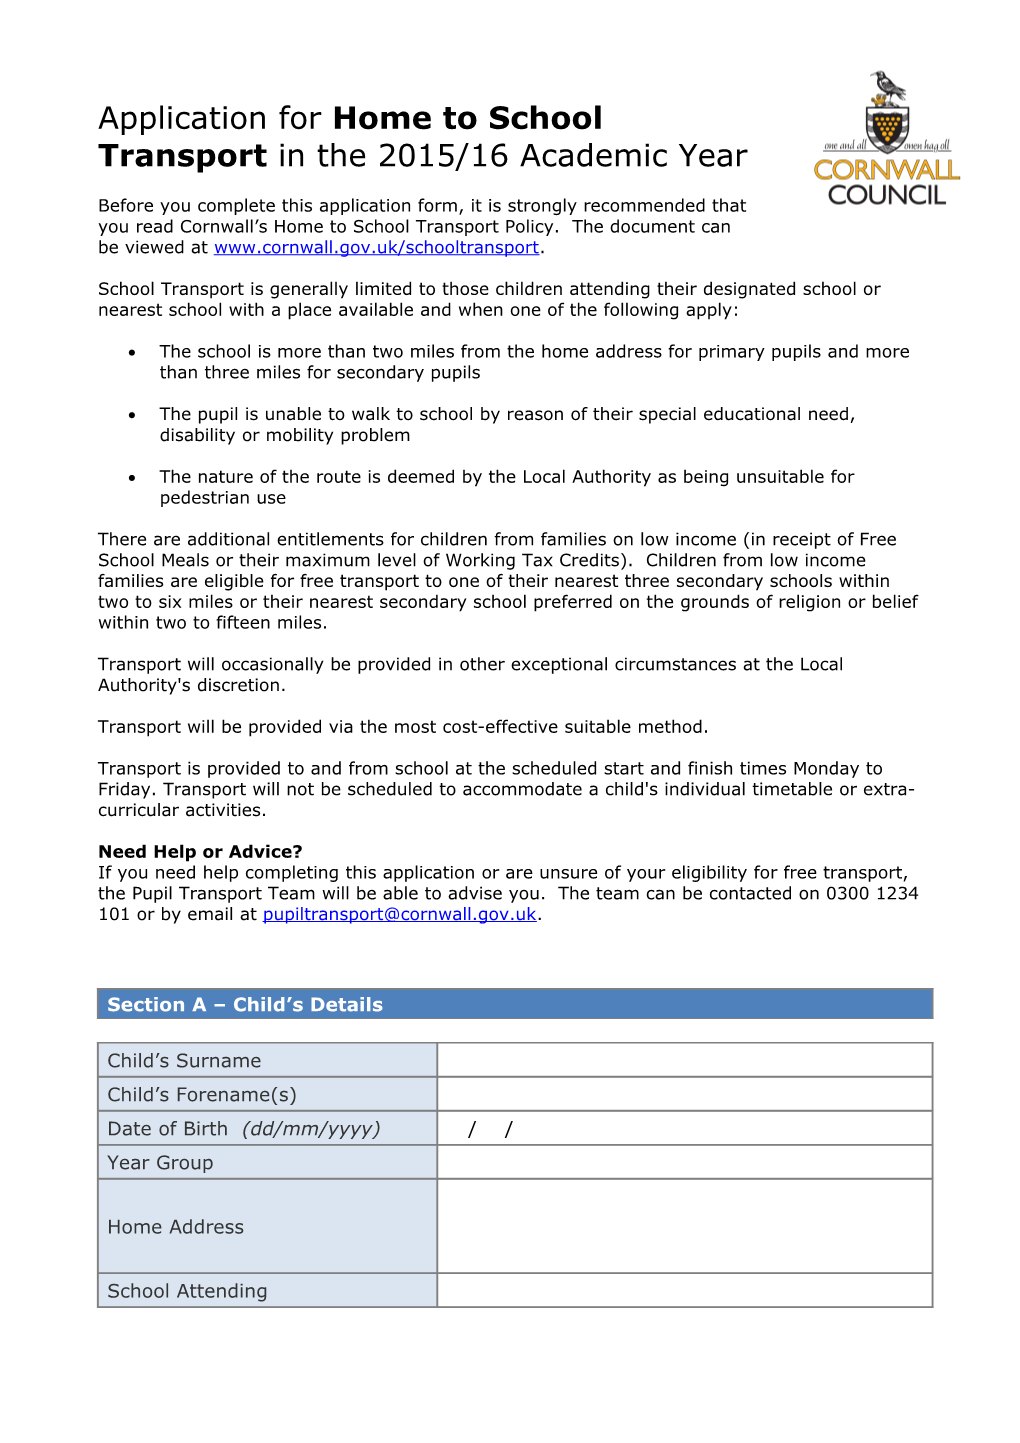 Application for Home to School Transport